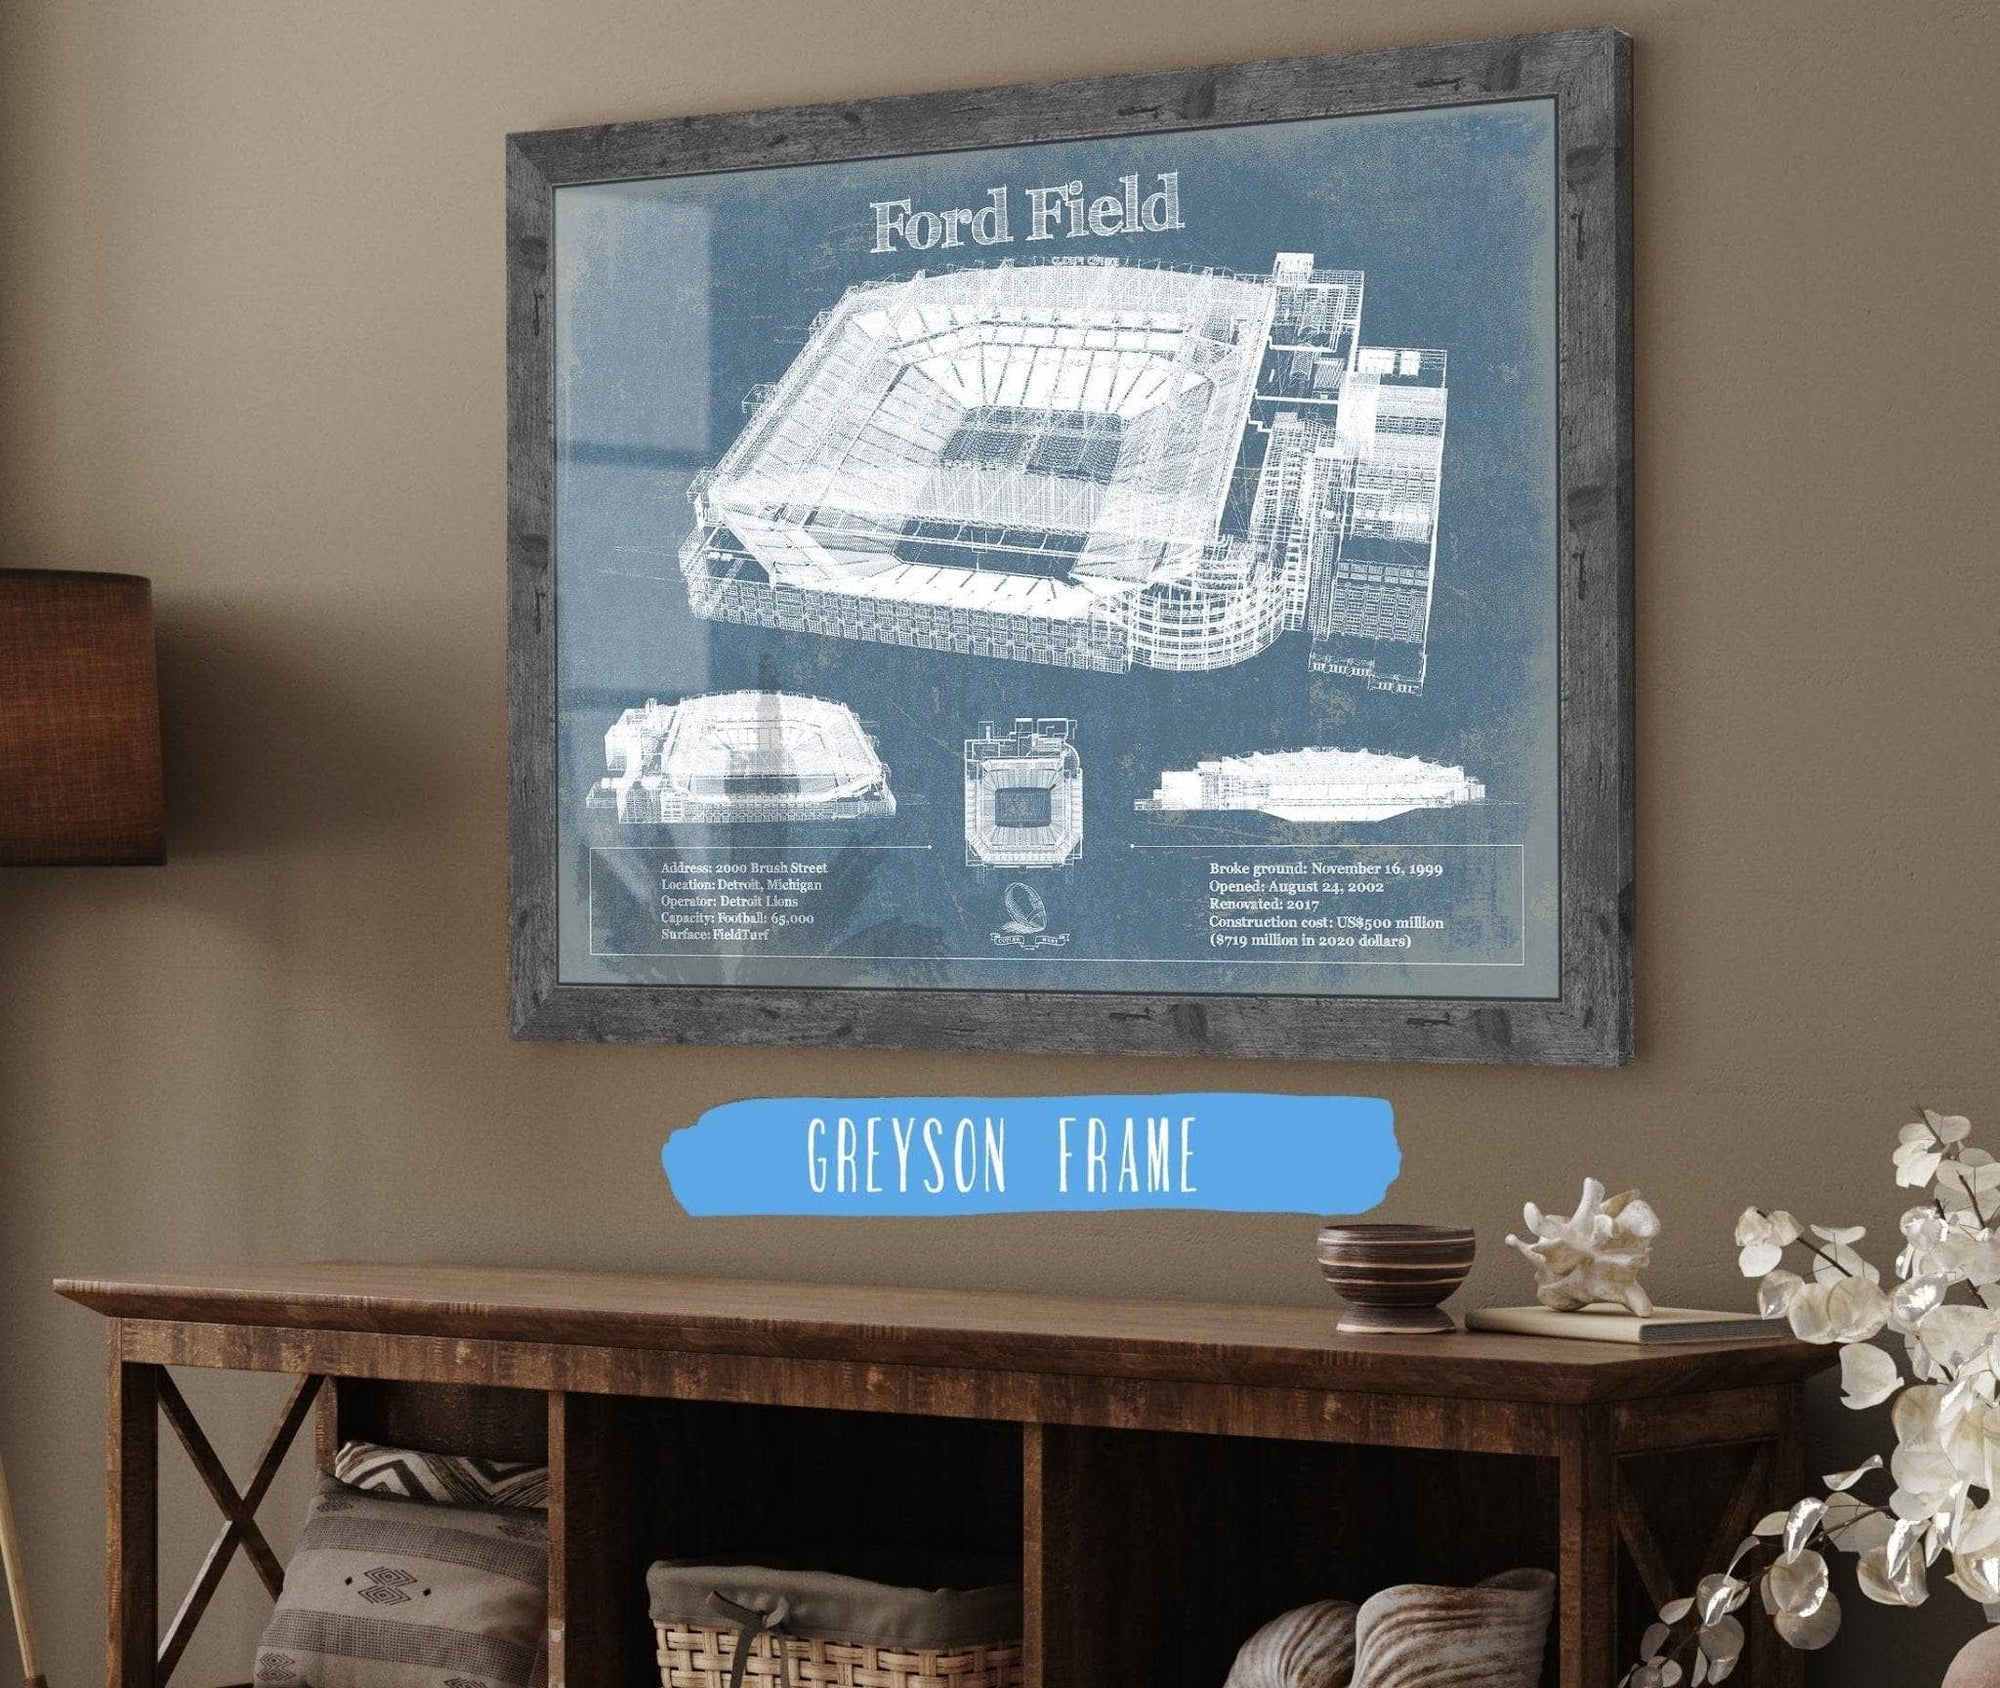 Cutler West Vehicle Collection 14" x 11" / Greyson Frame Ford Field - Detroit Lions NFL Vintage Football Print 933311125_54882